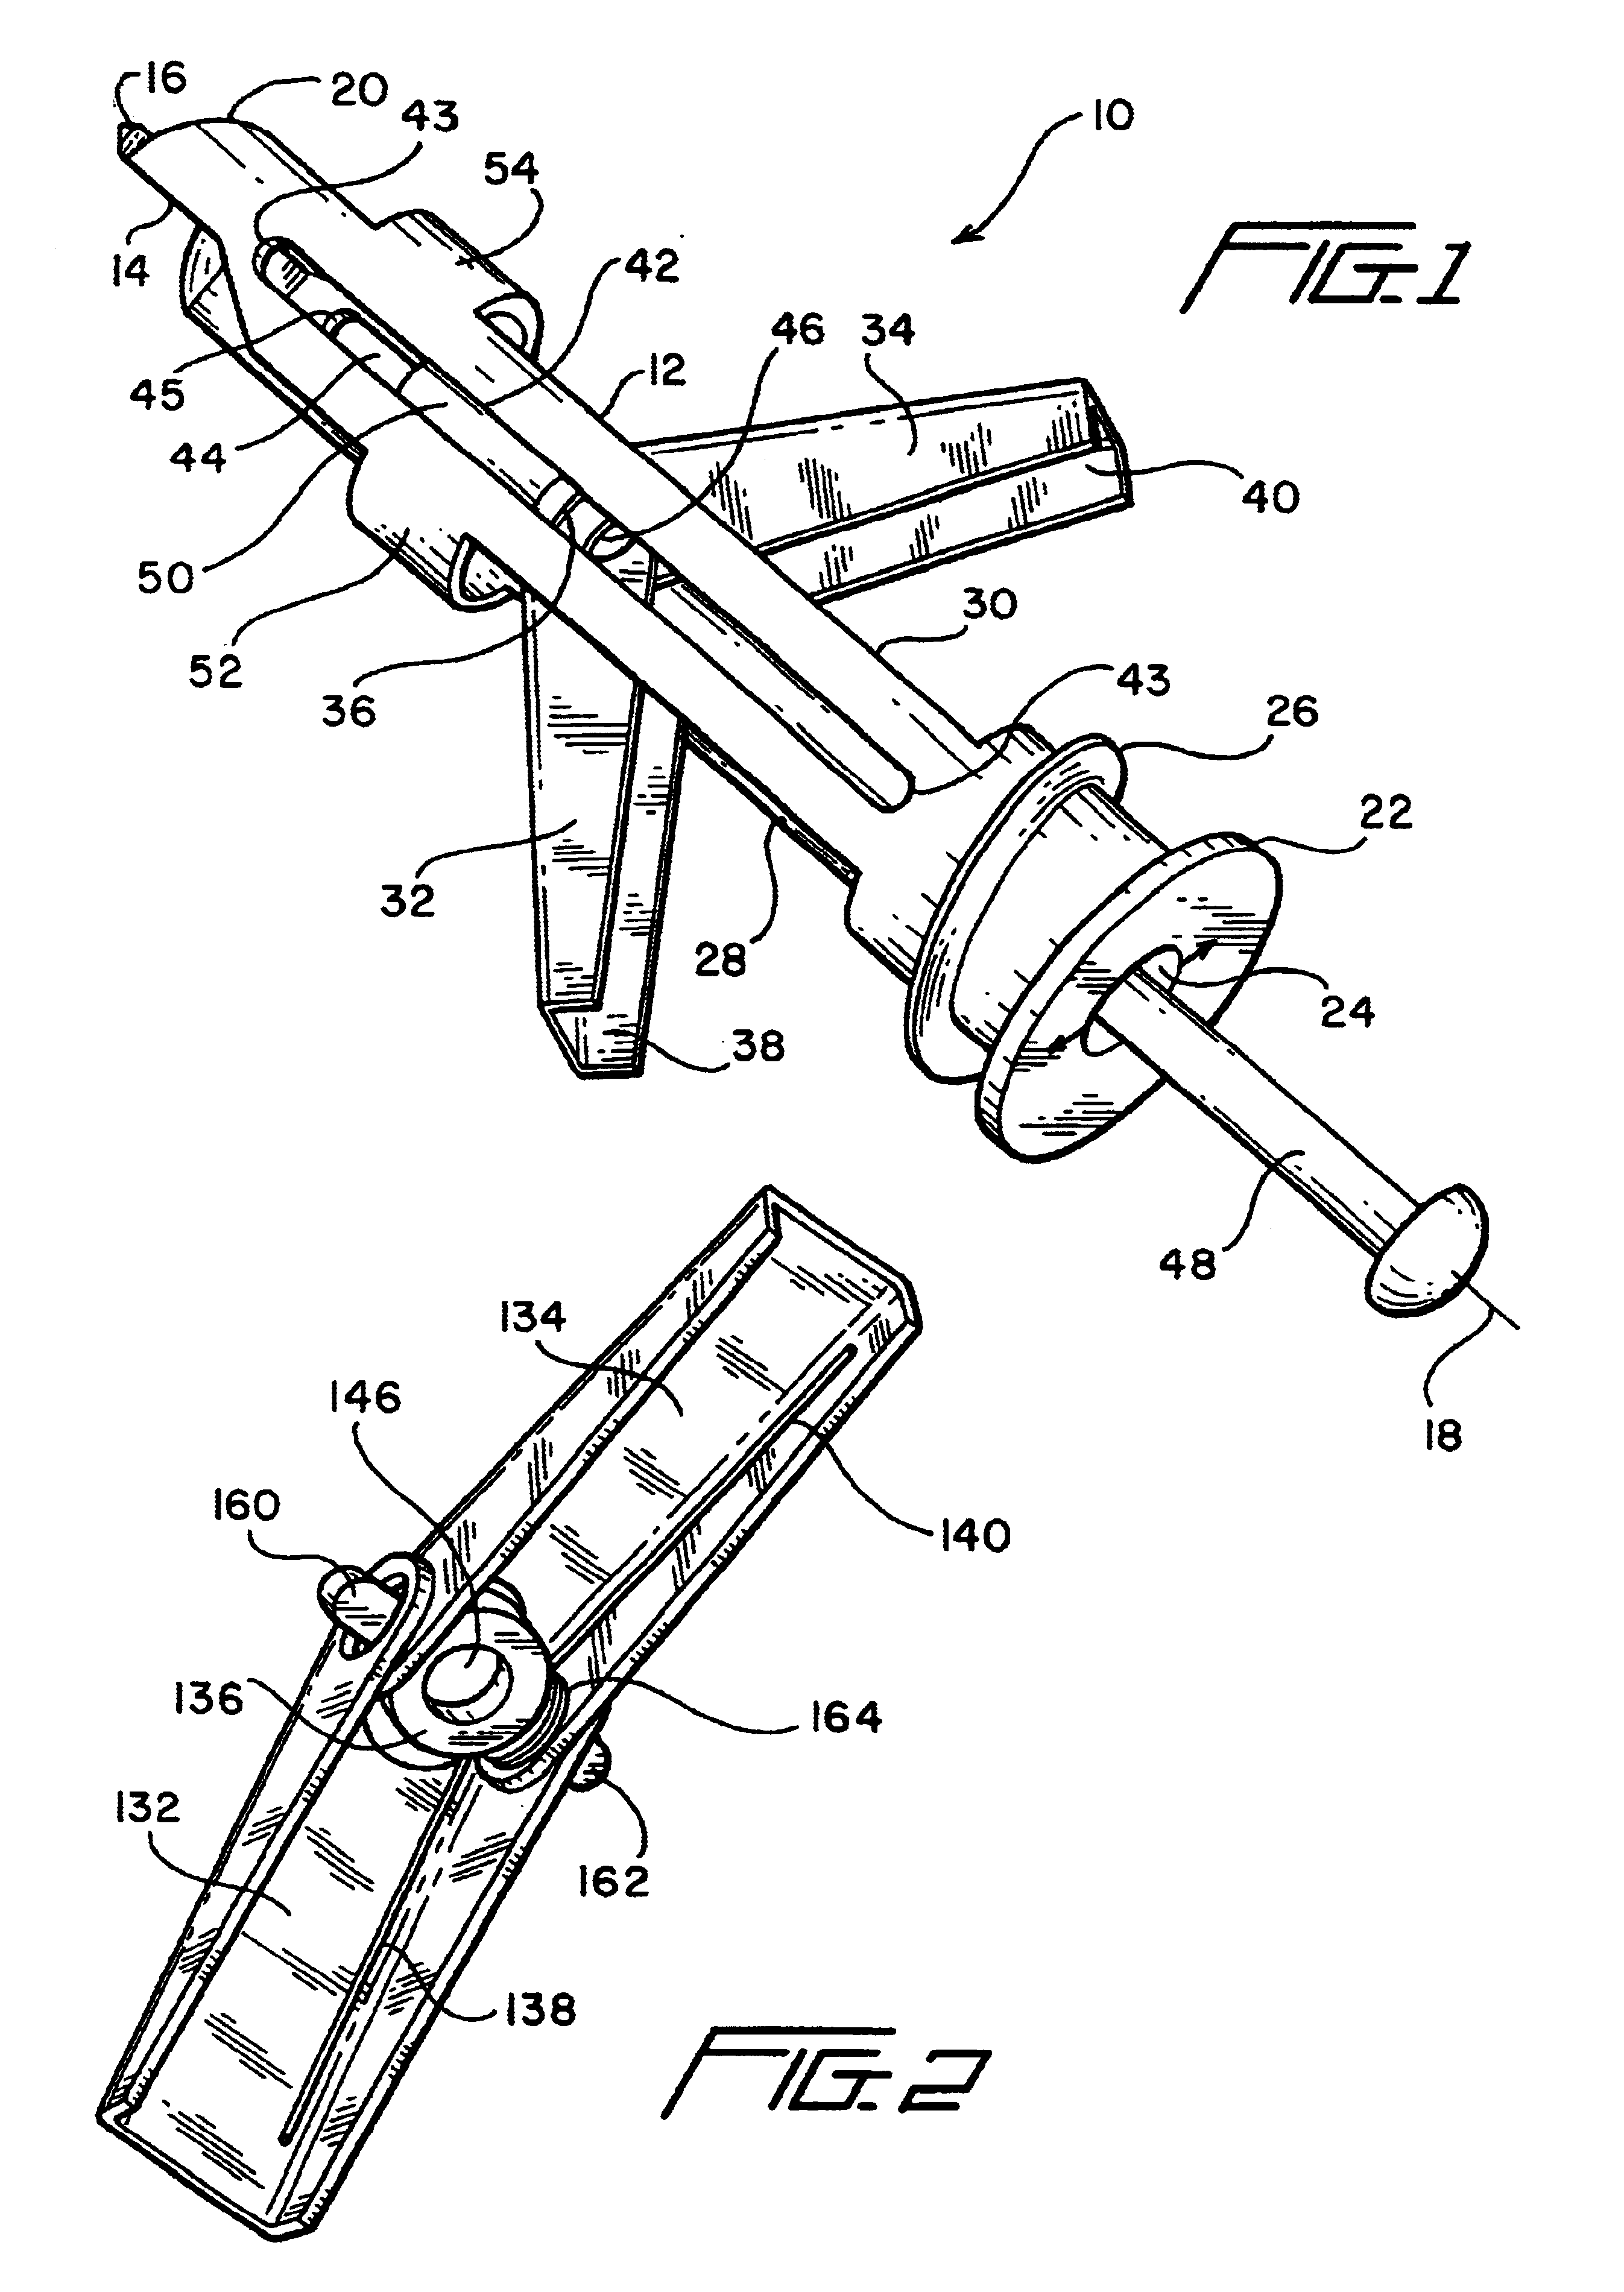 Heavy duty toggle bolt fastener assembly, and method of installing and removing the same